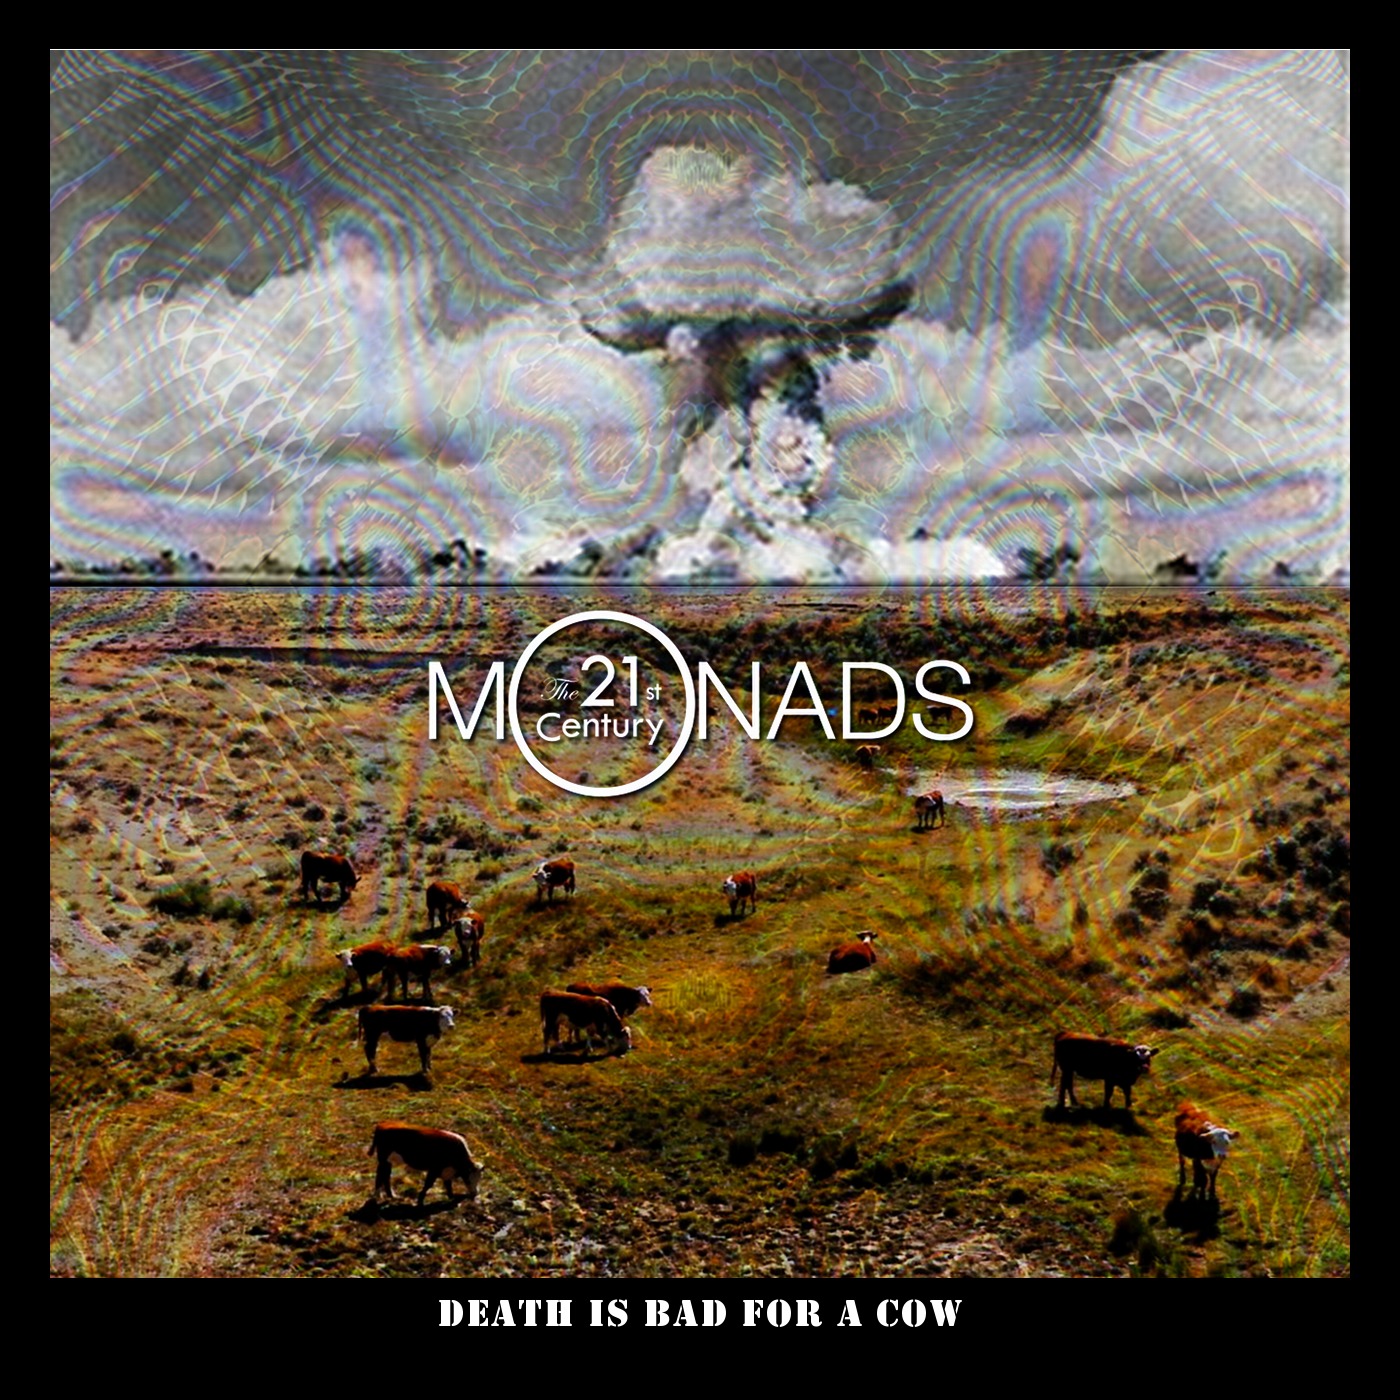 Album cover of "Death is Bad for a Cow" shows cows in a field, with a black and white mushroom cloud in the distance.